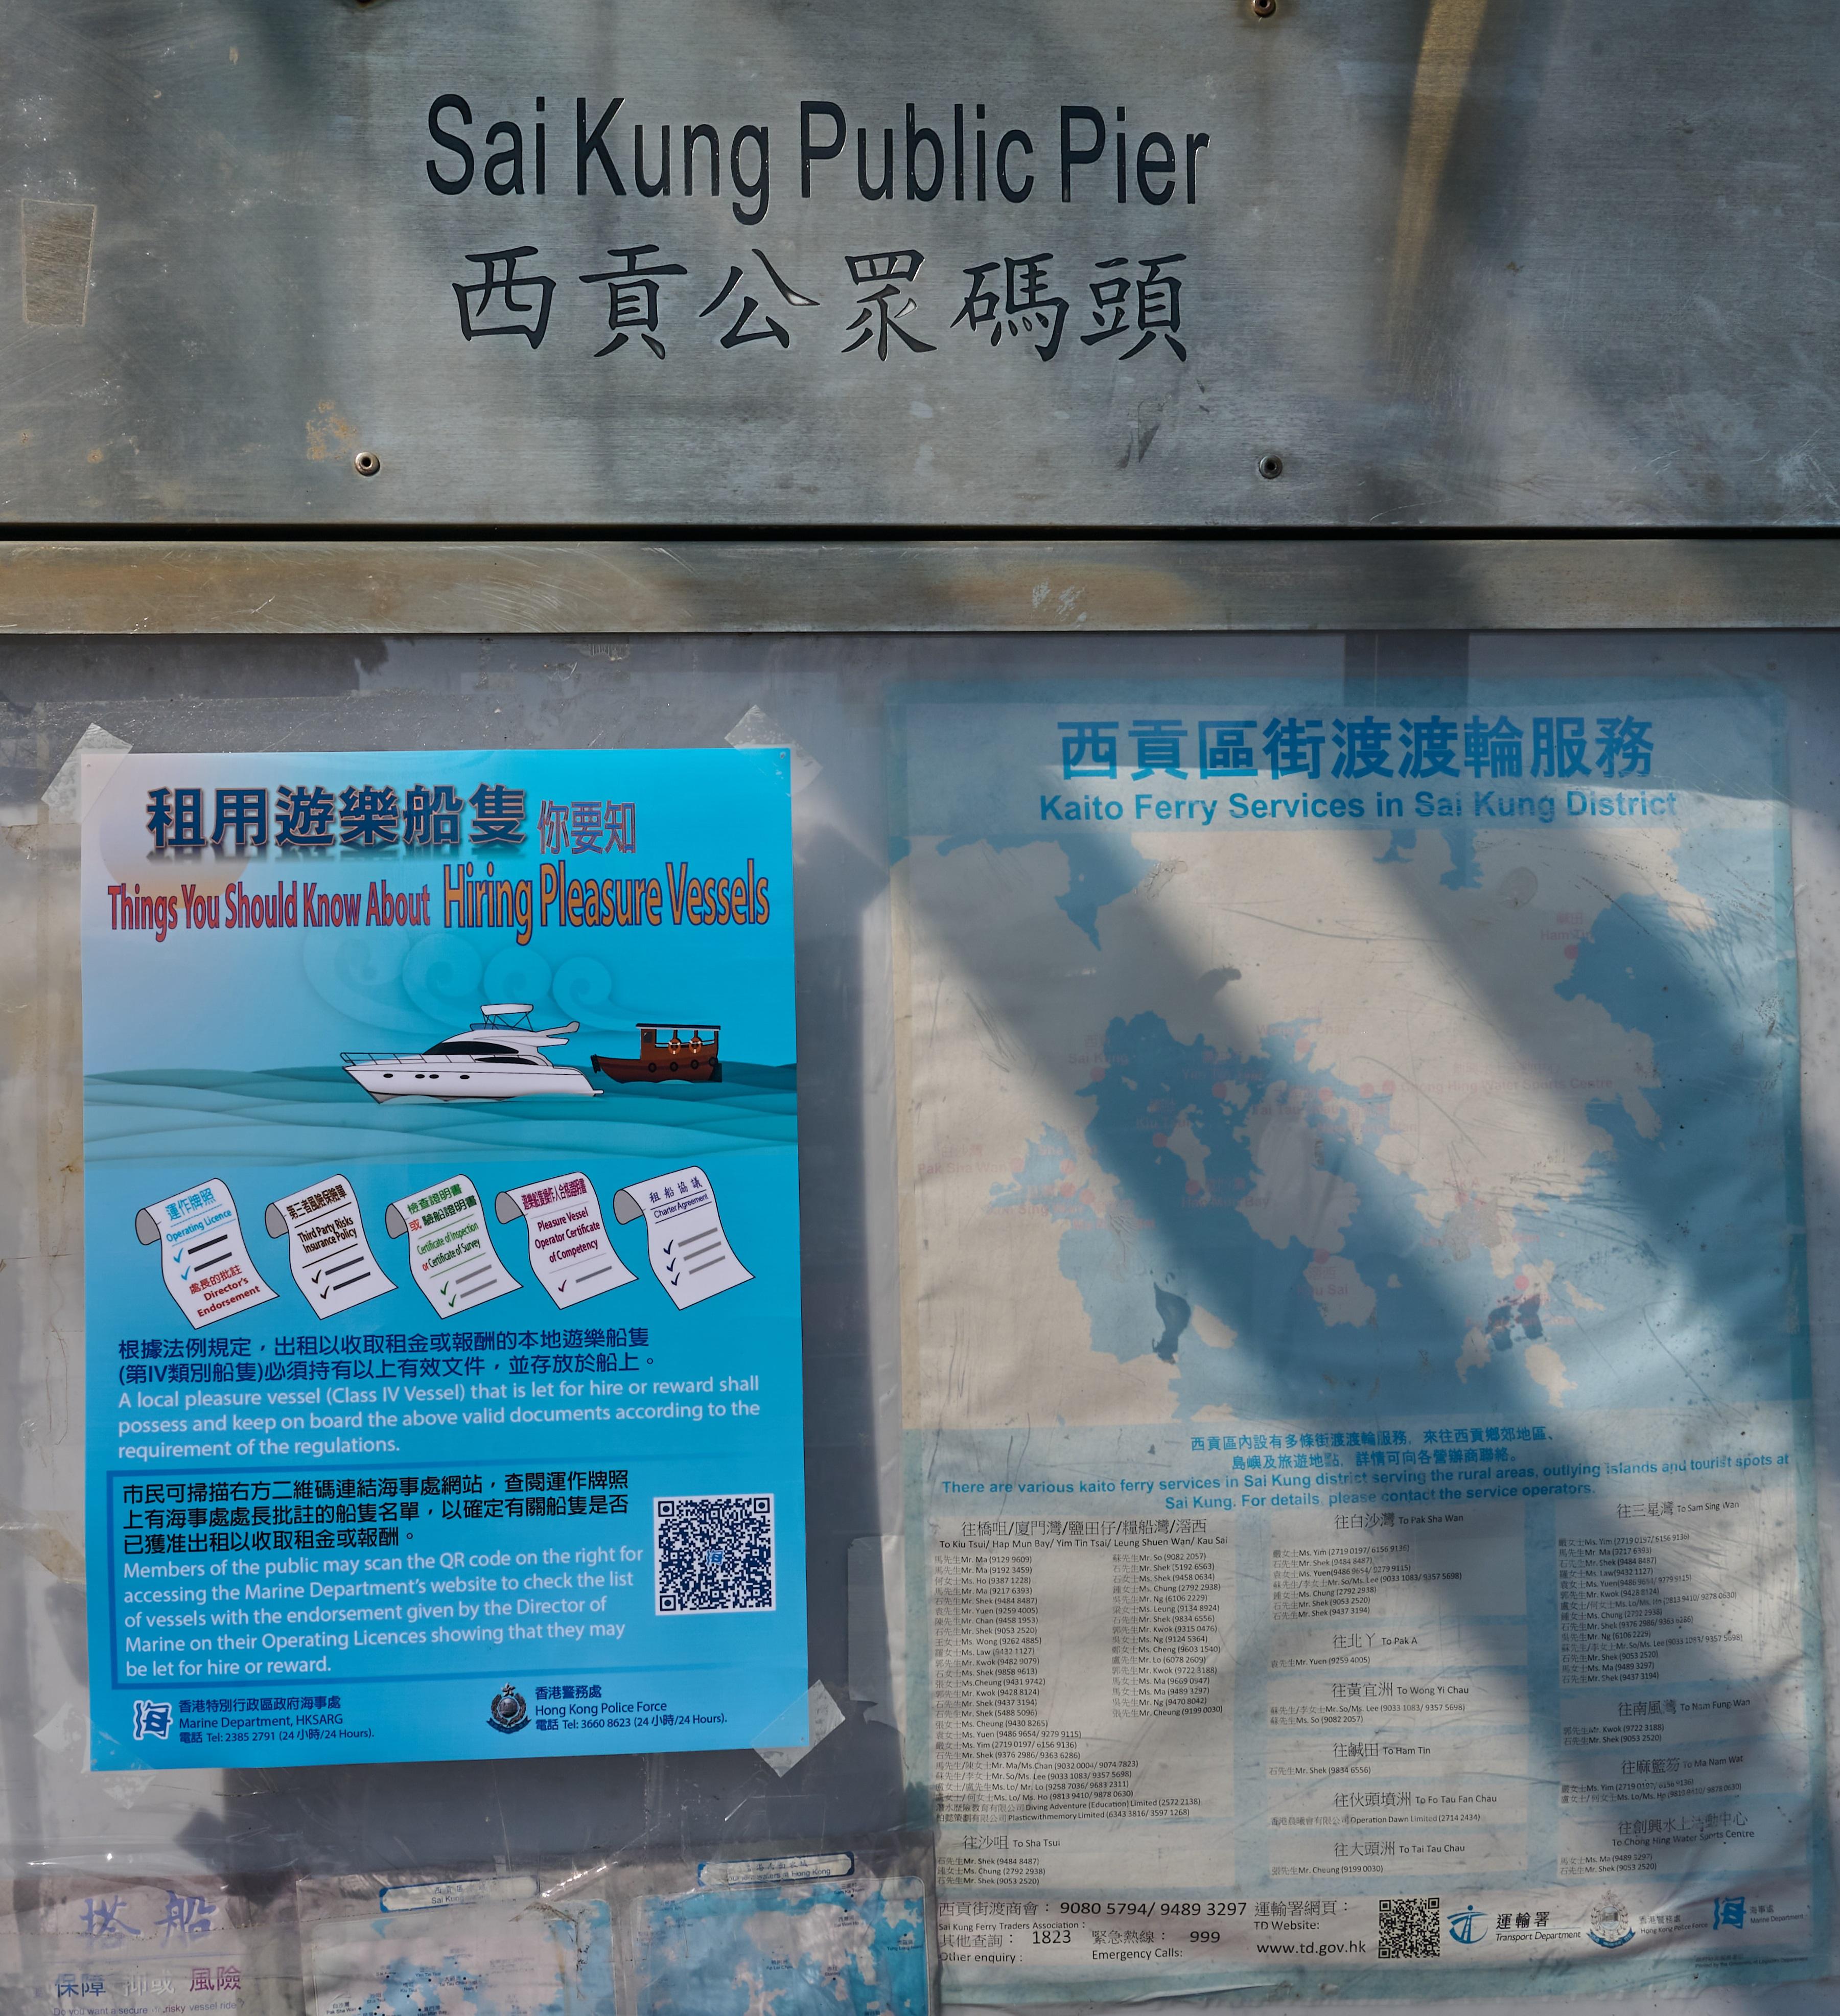 The Marine Department (MD) has uploaded the list of vessels endorsed to be let for hire or reward to its departmental website. Members of the public can simply scan the QR code shown on the relevant poster and verify if a local pleasure vessel is allowed by the MD to be let for hire or carry passengers for reward.